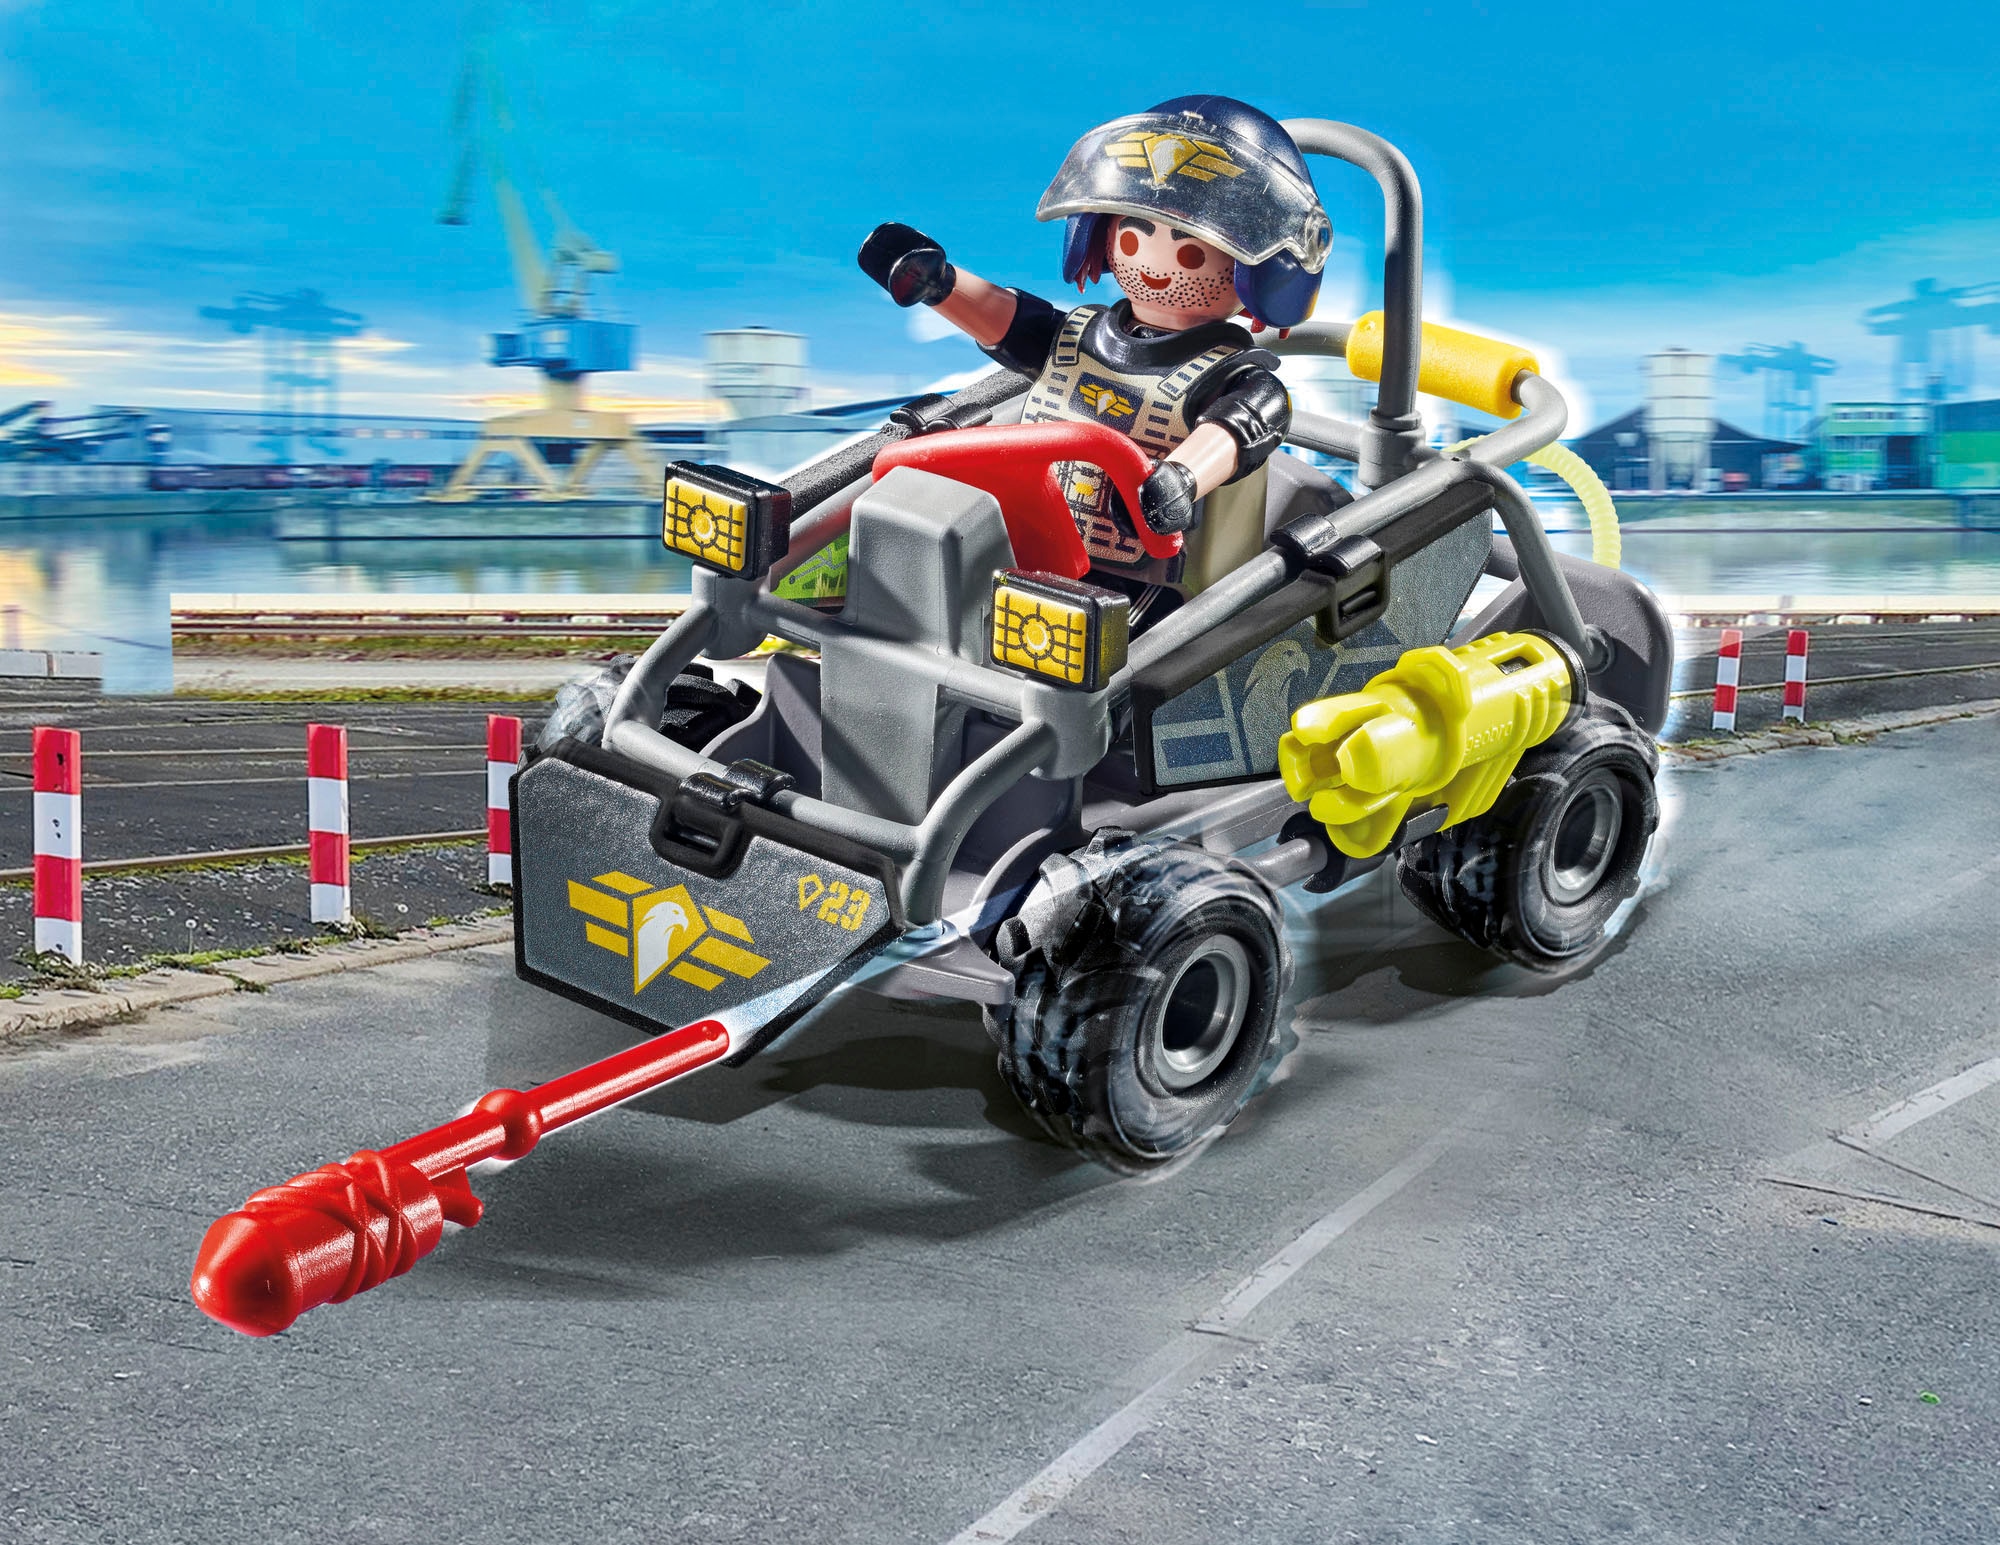 Playmobil® Konstruktions-Spielset »SWAT-Multi-Terrain-Quad (71147), City Action«, (59 St.), Made in Europe